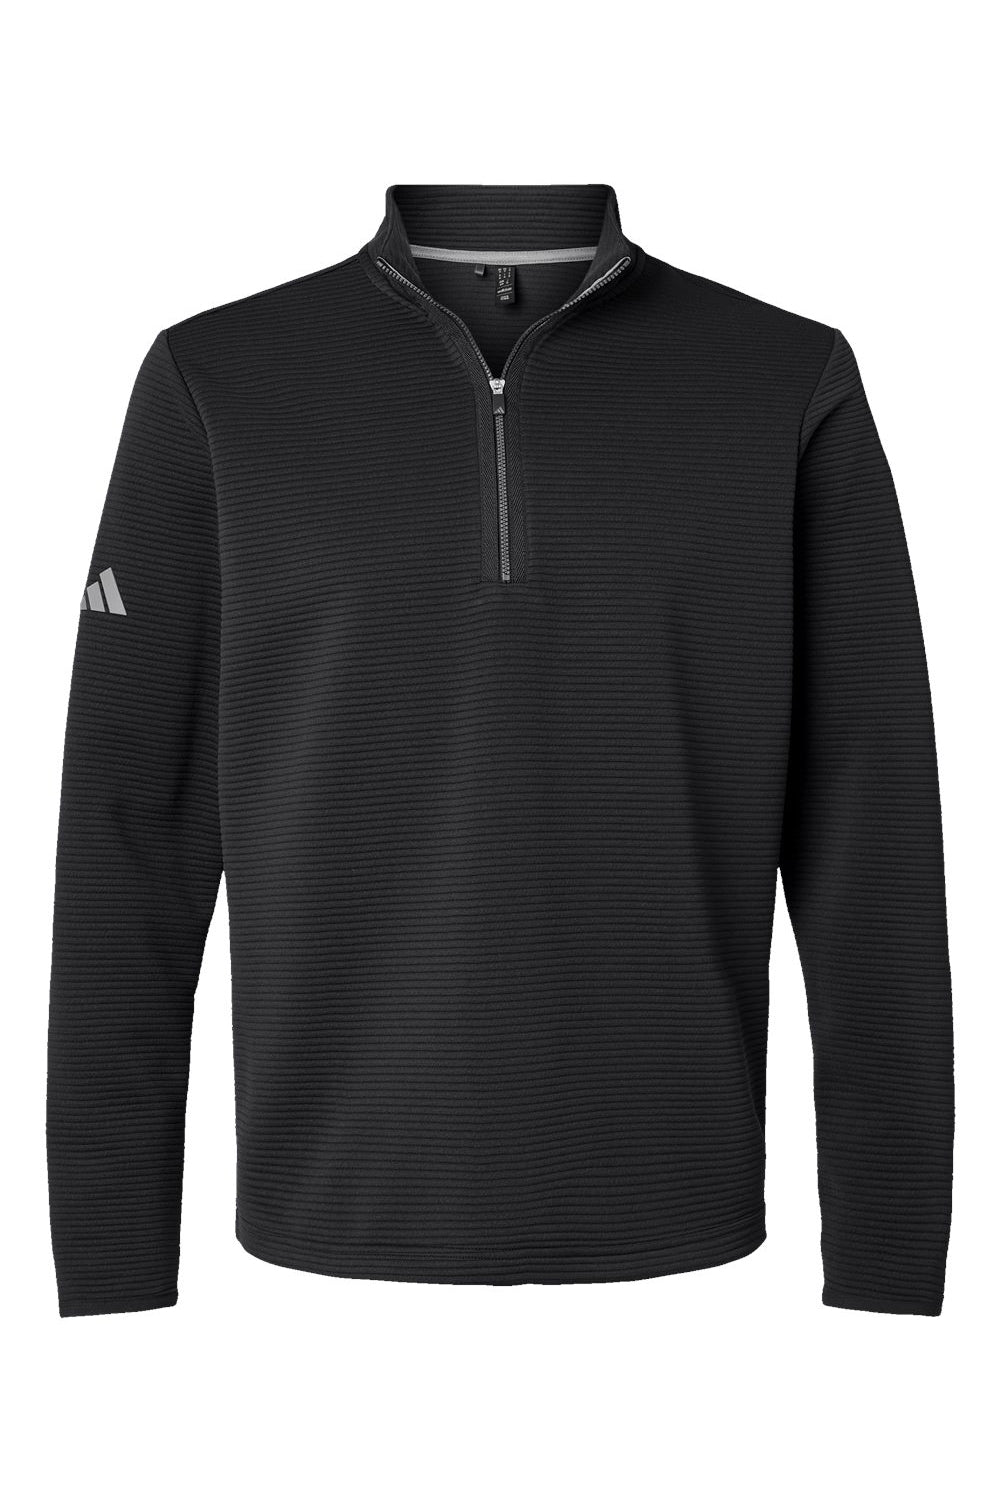 Adidas A588 Mens Spacer 1/4 Zip Pullover Black Flat Front